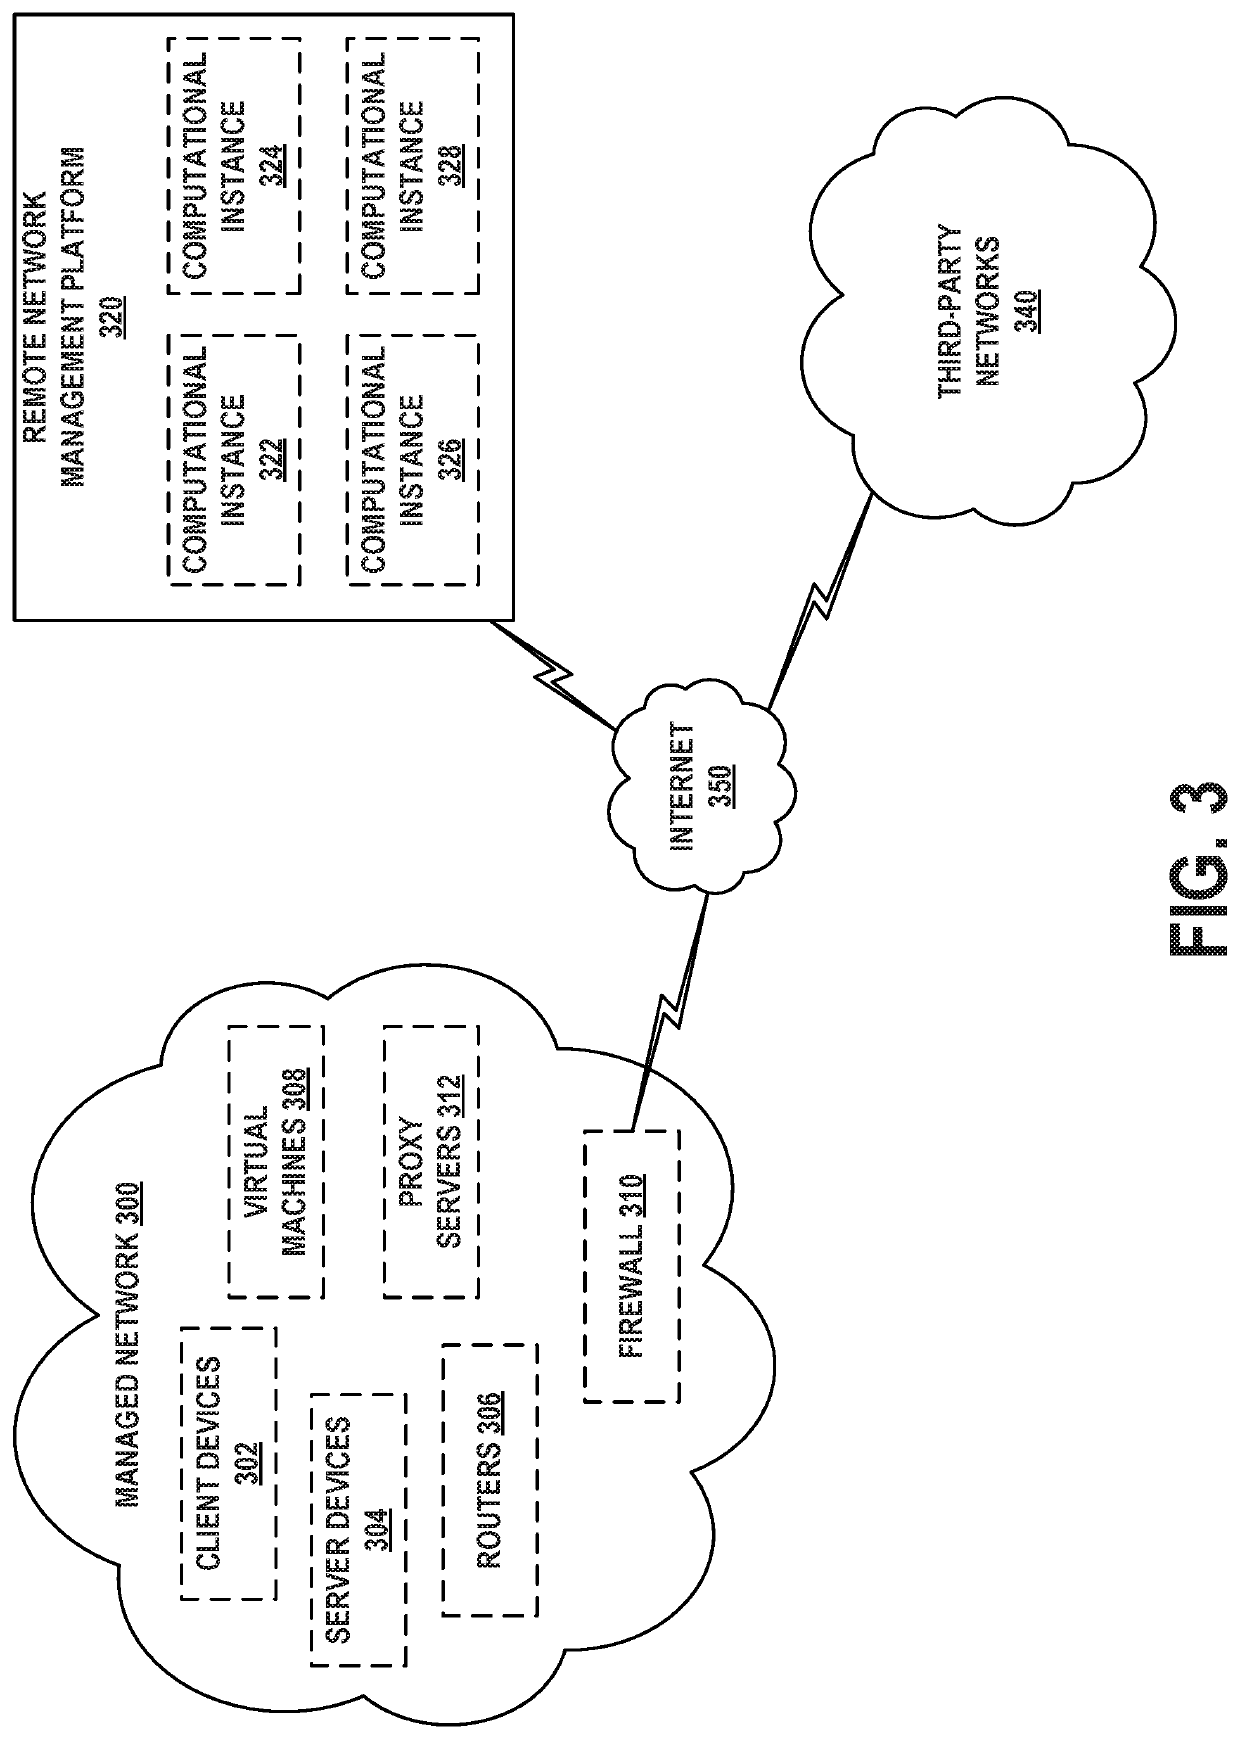 Automatically detecting misuse of licensed software